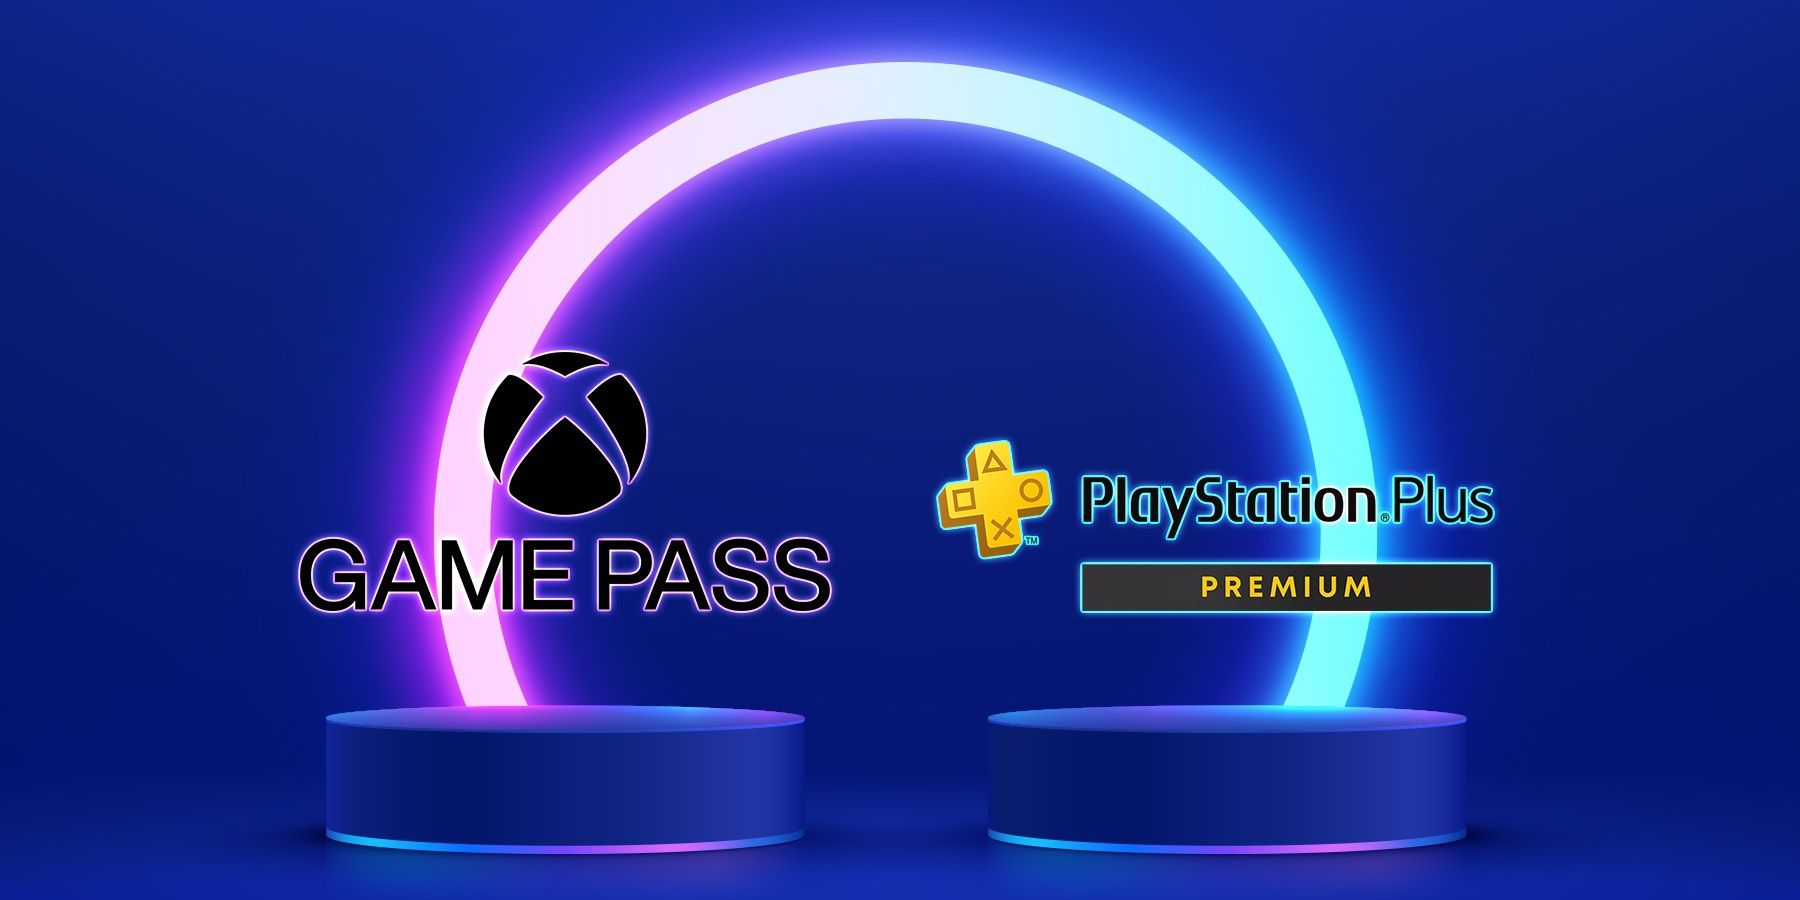 xbox game pass and playstation plus premium